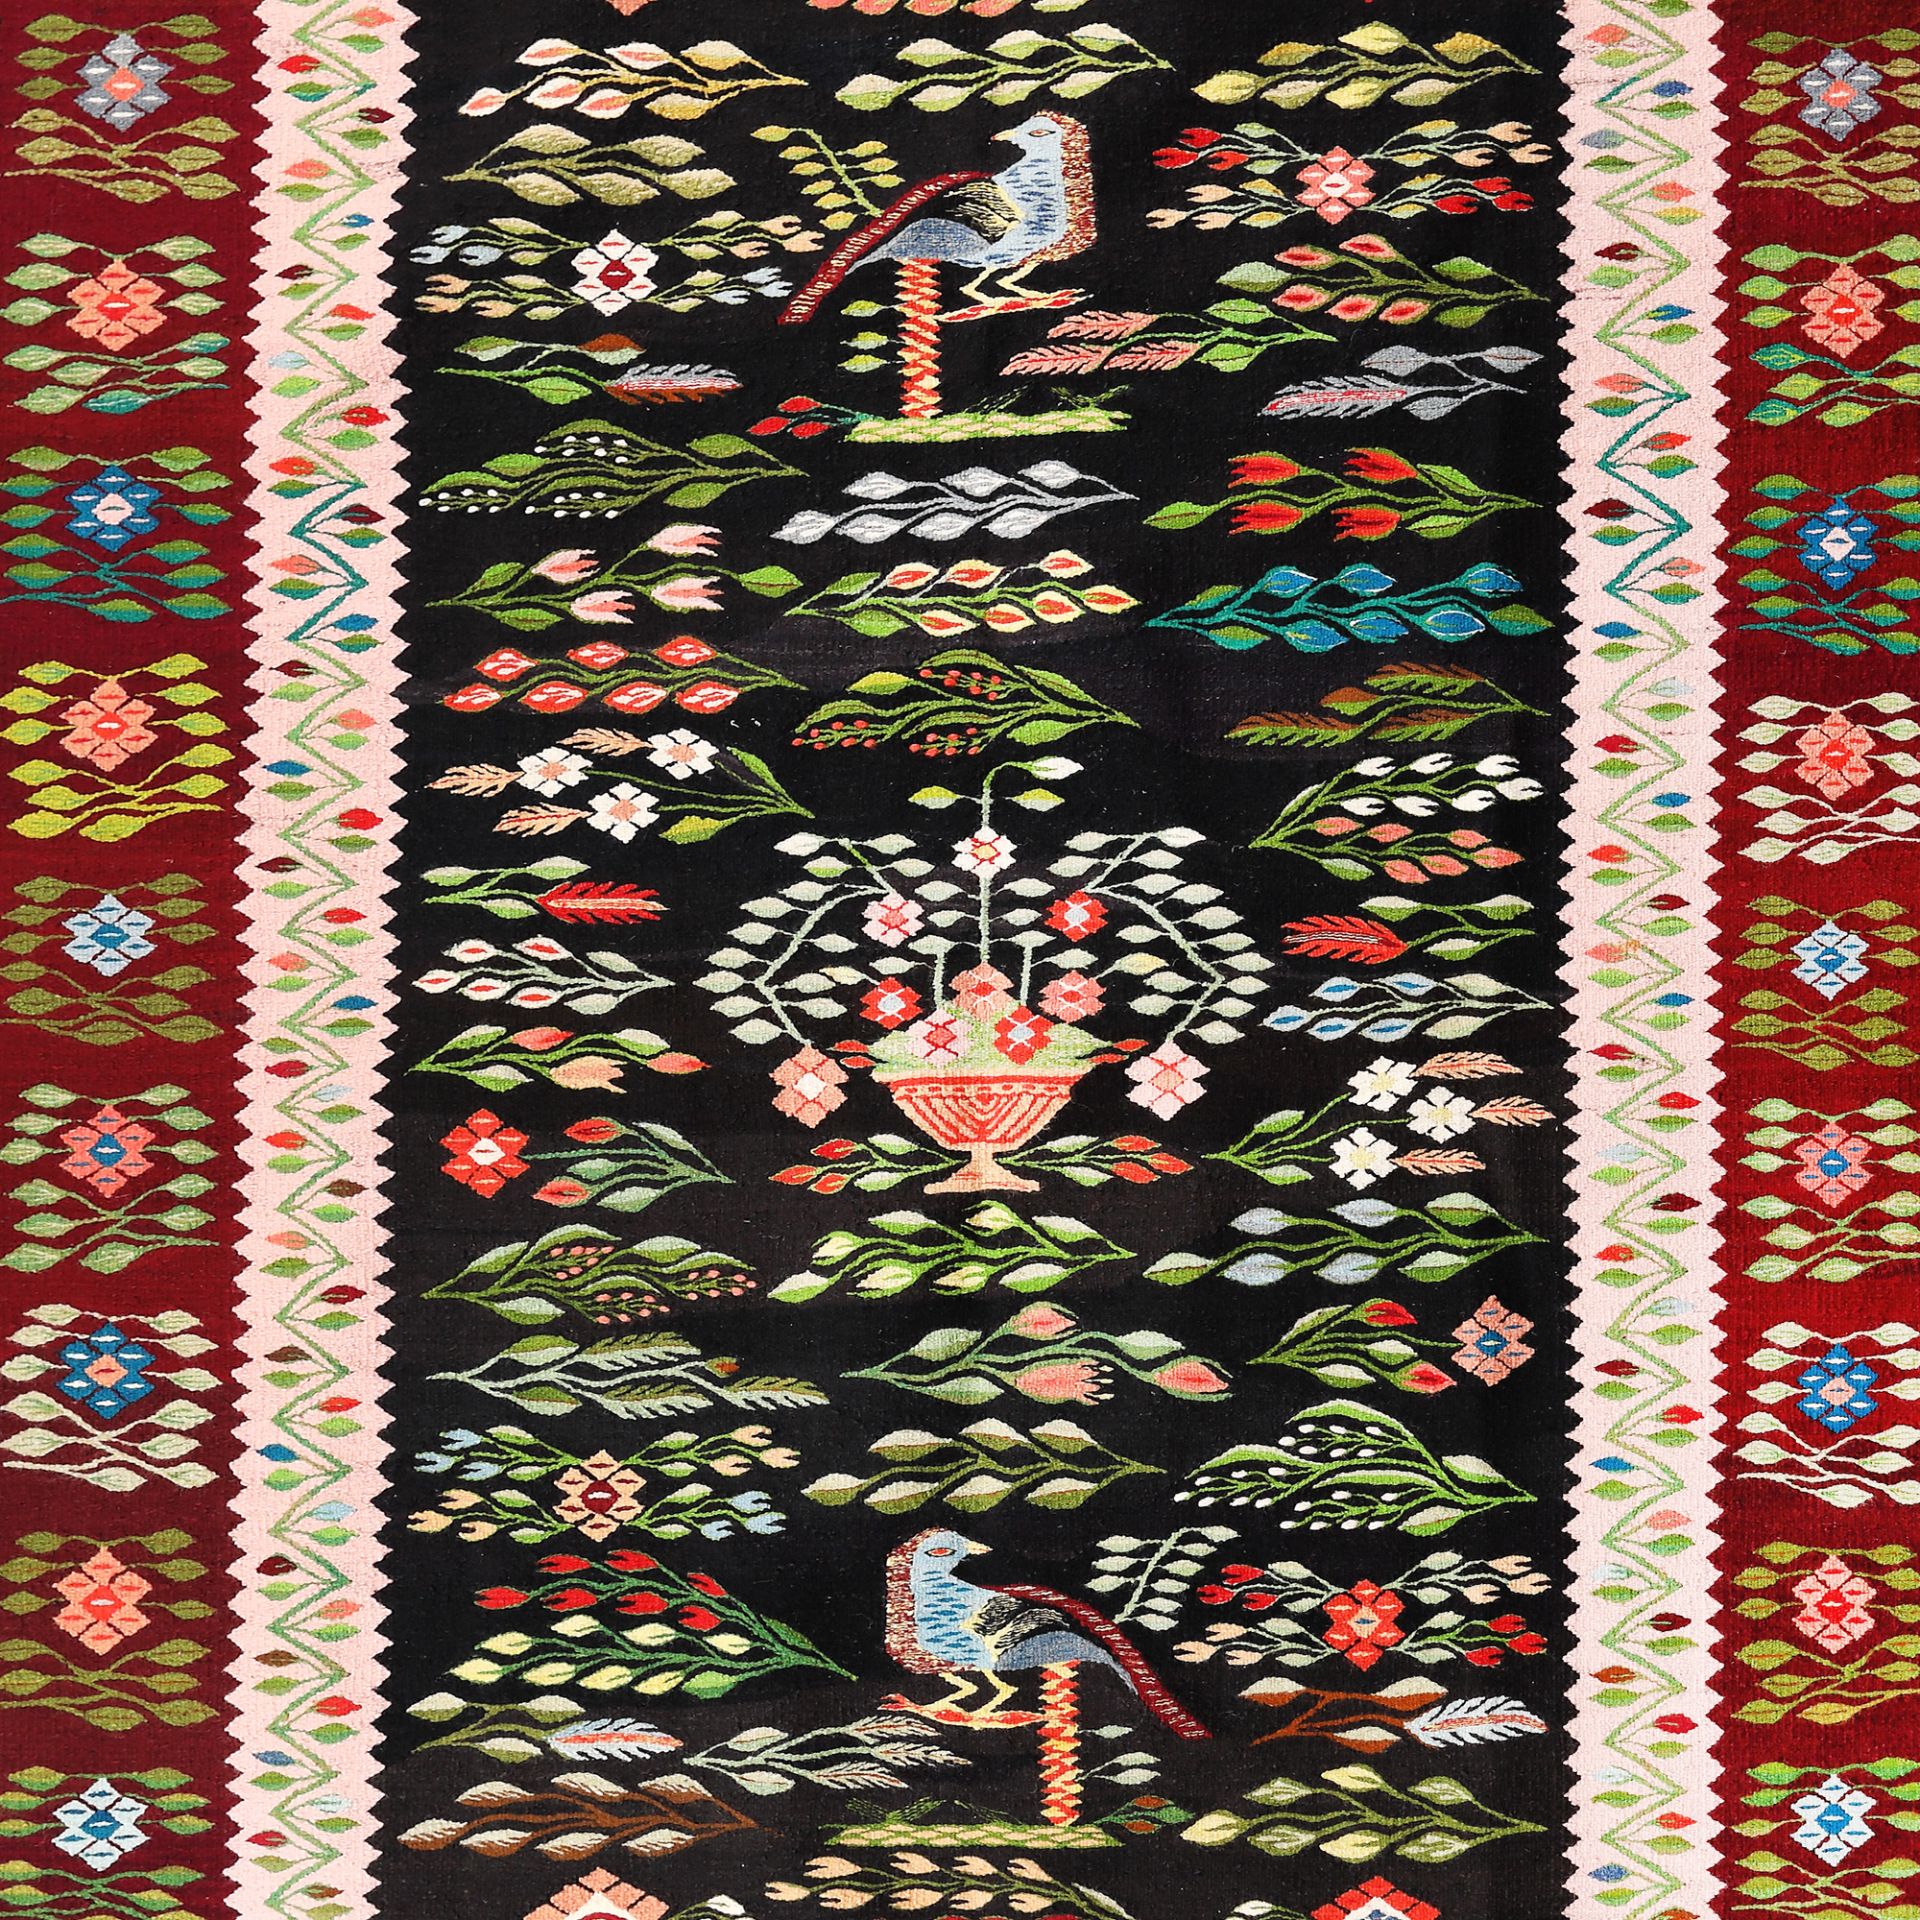 Oltenian wool rug, decorated with peacocks, hollyhocks and other specific floral motifs, first half  - Bild 2 aus 2